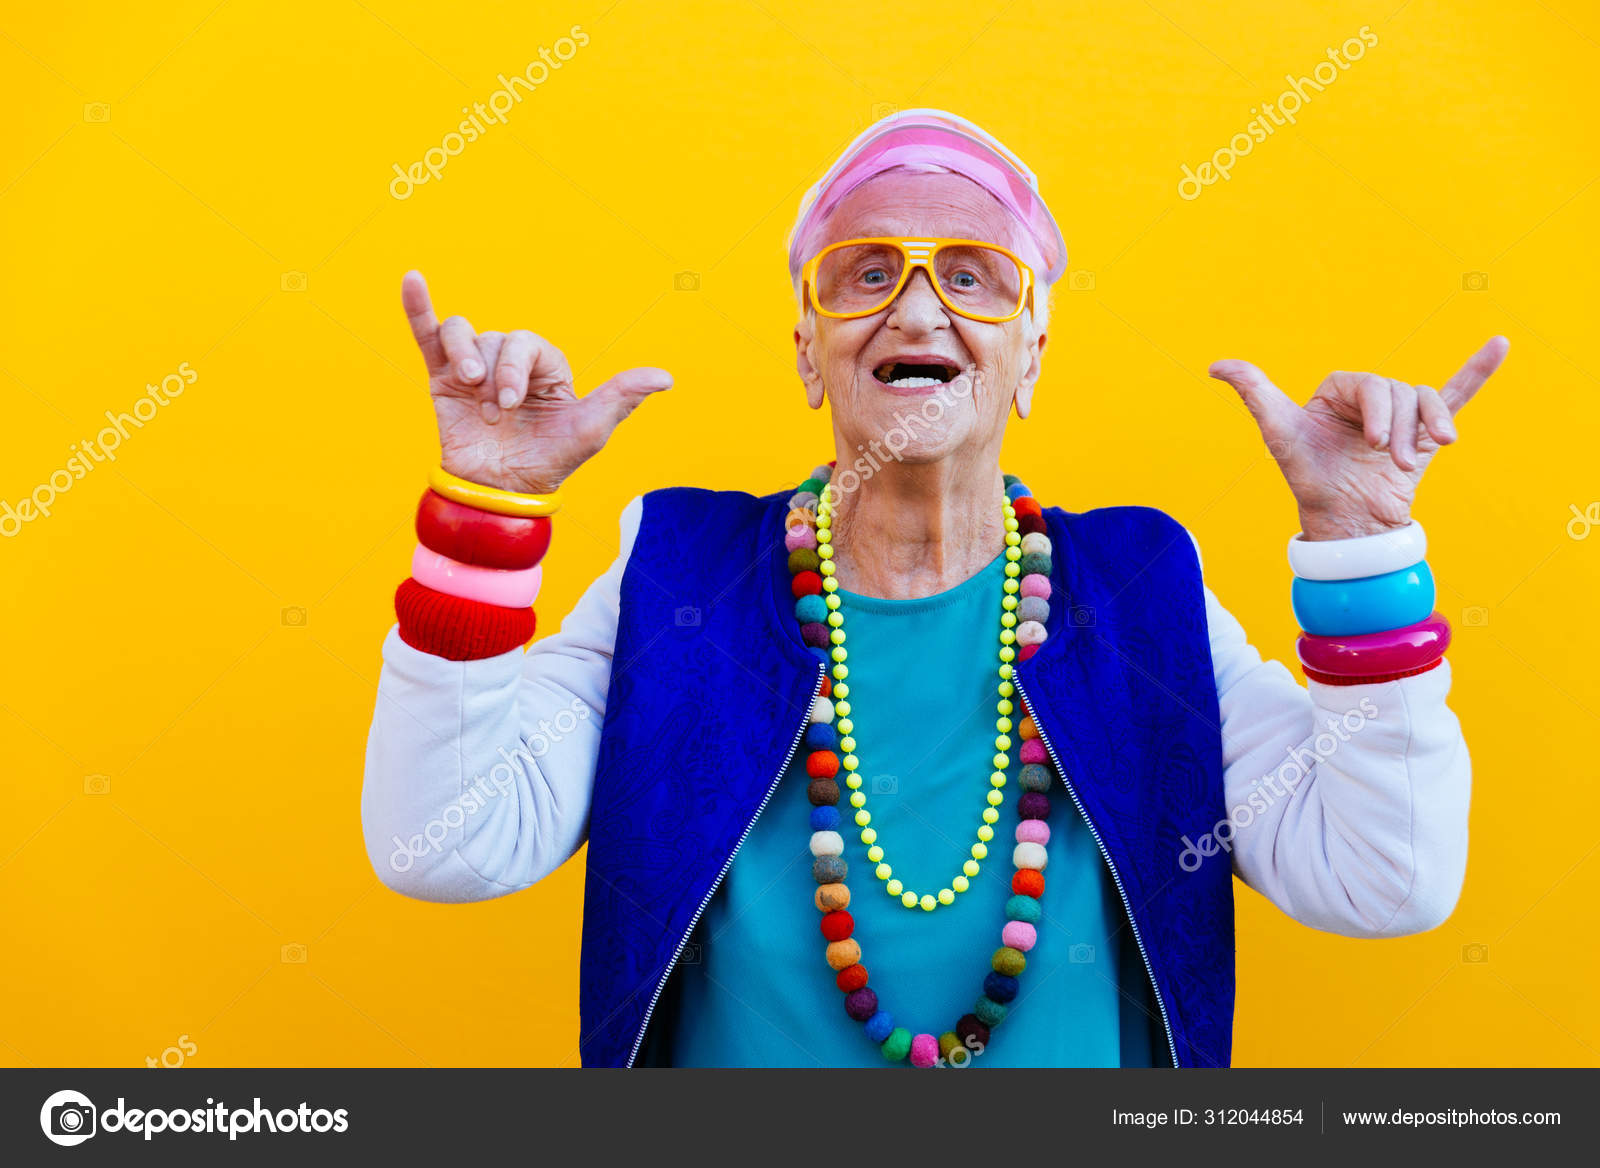 Funny grandmother portraits. 80s style outfit. trapstar dance on